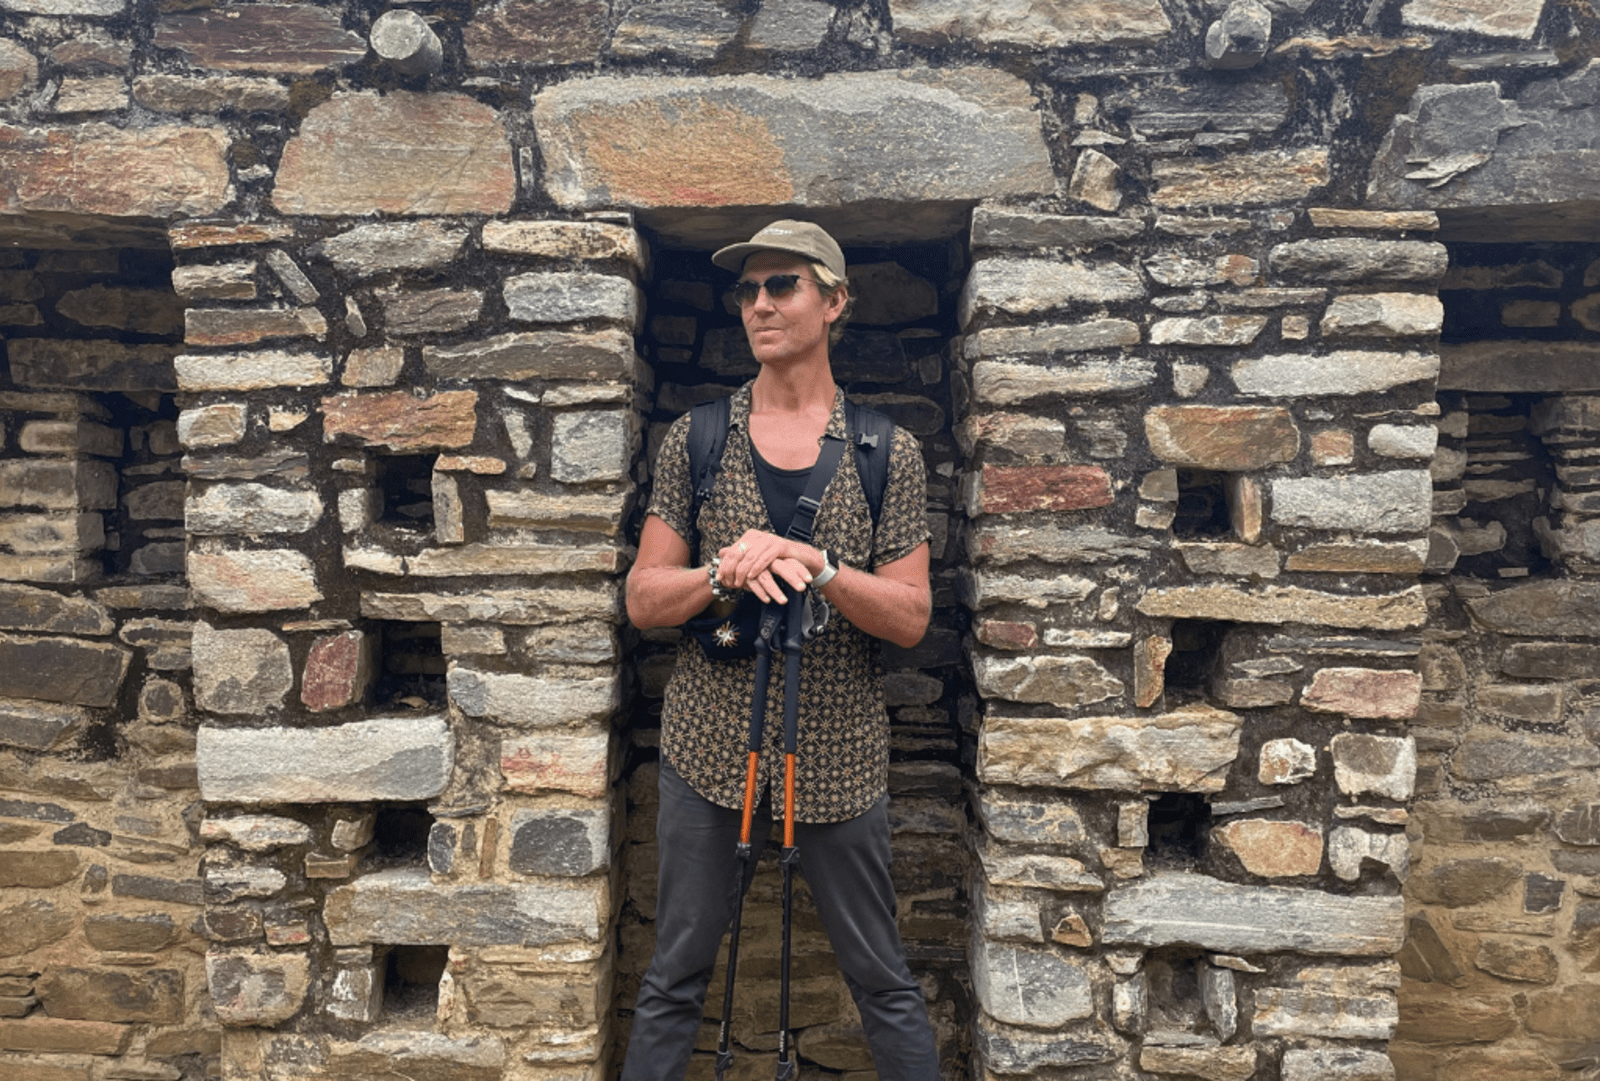 Jacob Stanley stands in a stone alcove among the ruins of the ancient Incan city of Choquequirao, Peru